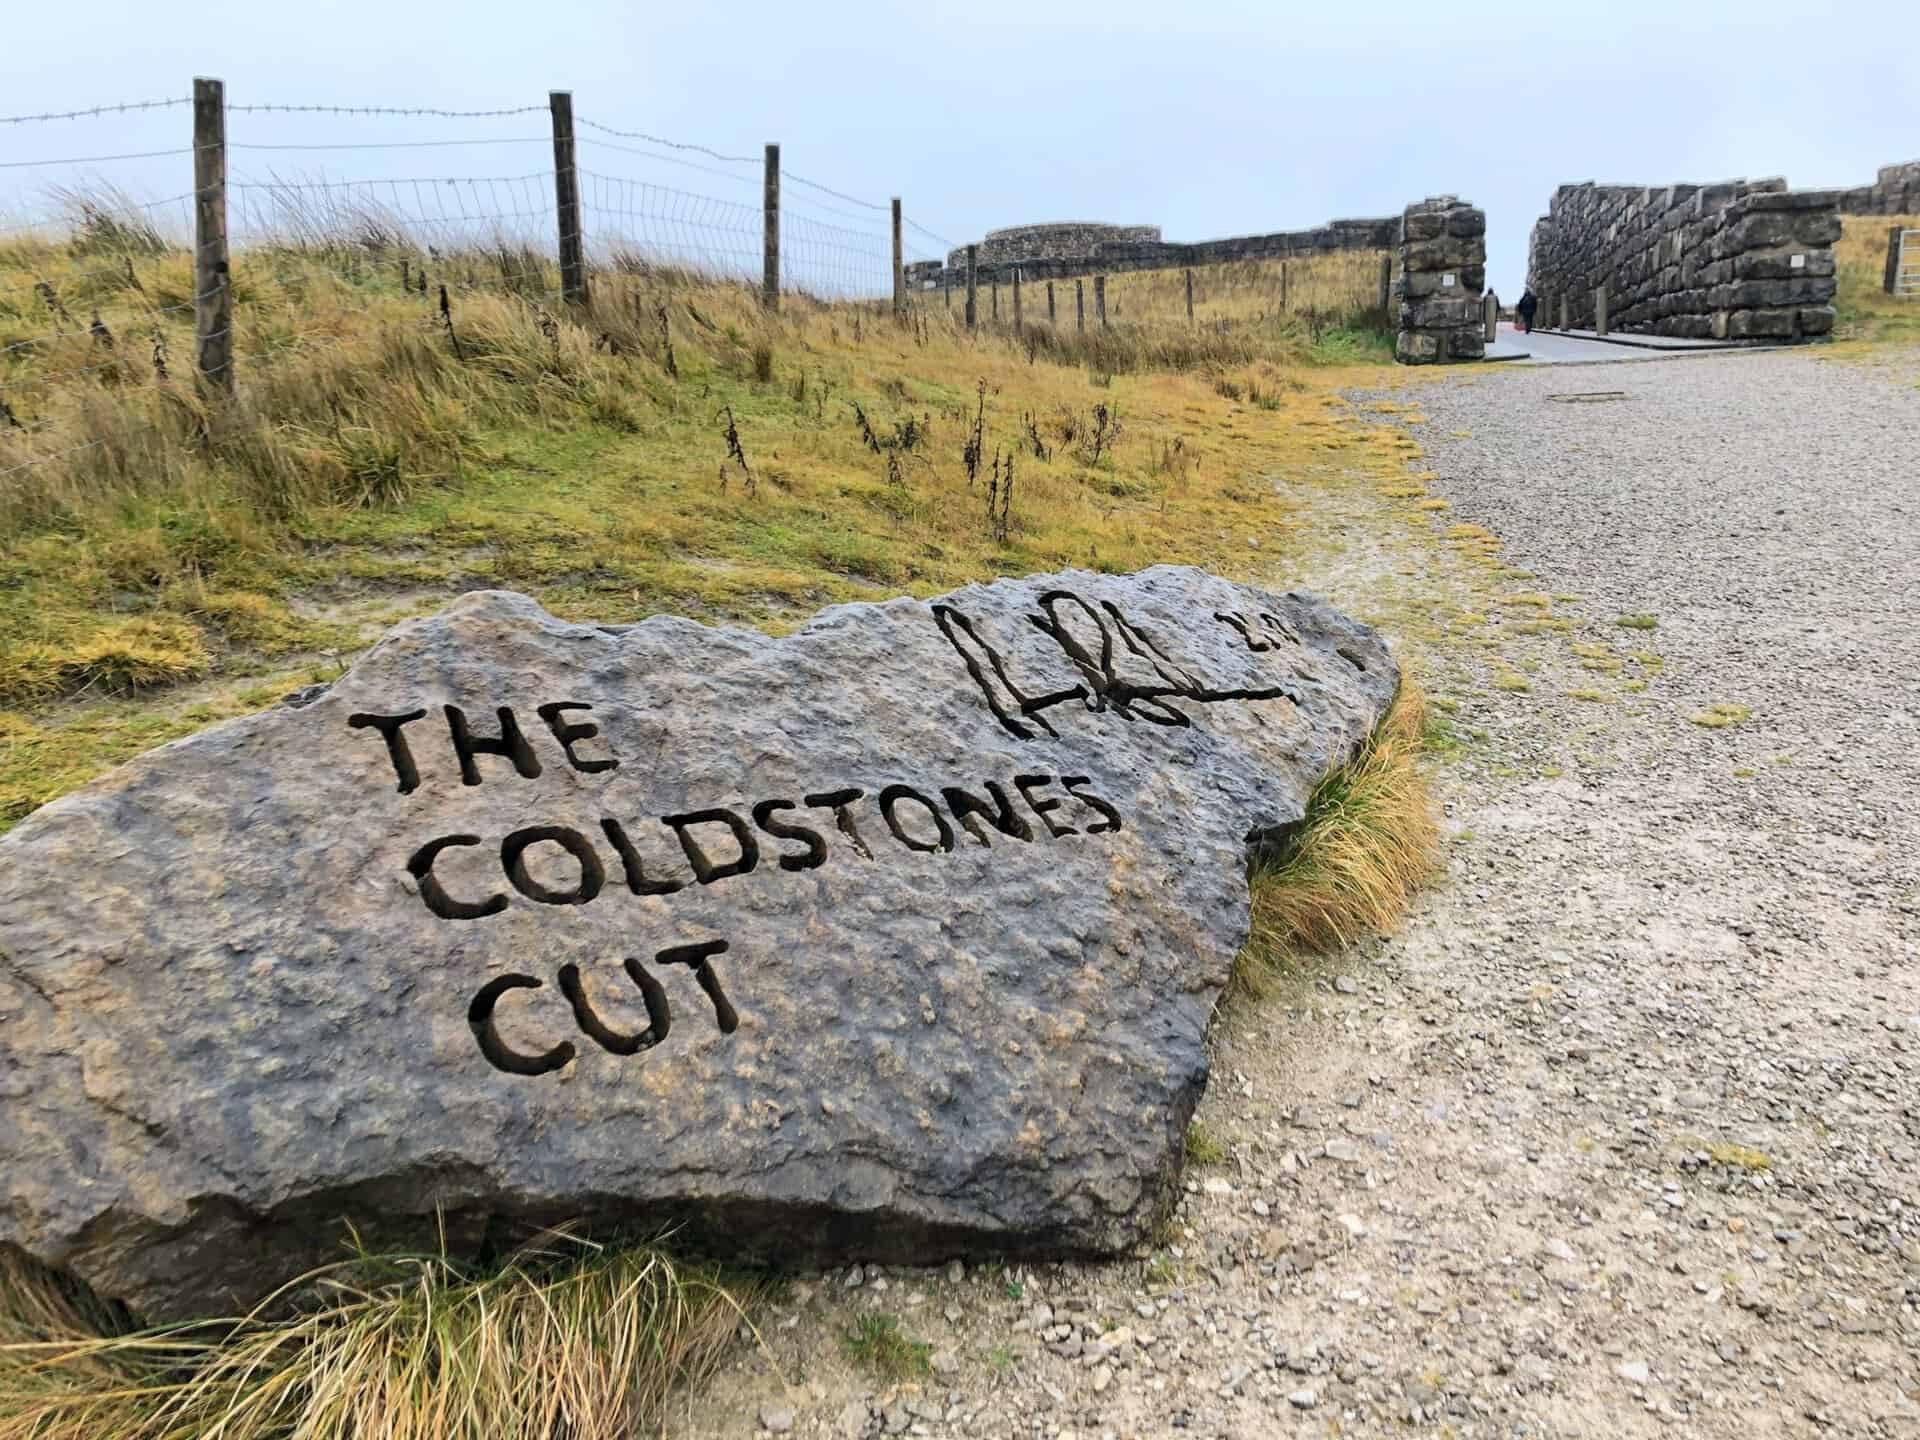 Coldstones Cut. This huge stone sculpture was designed by artist Andrew Sabin and its viewing platform overlooks Coldstones Quarry. The site is on the B6265 about two miles west of Pateley Bridge.